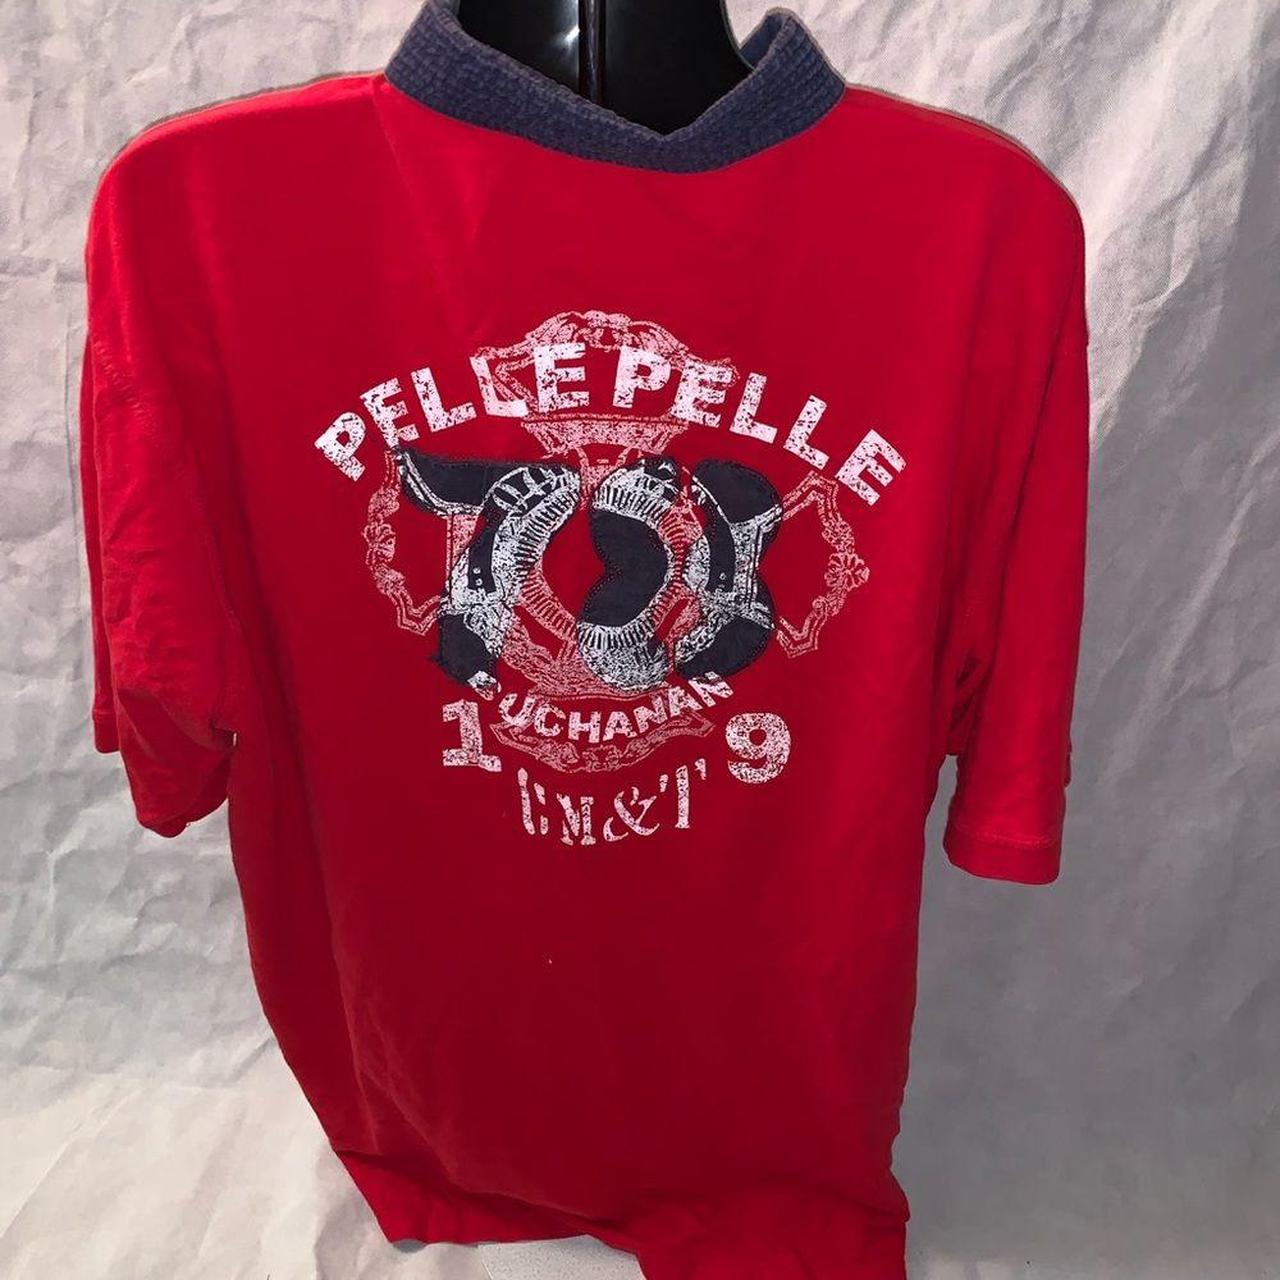 Product Image 2 - pellepelle Polo Shirt
Size 4XL
1978 
Marc